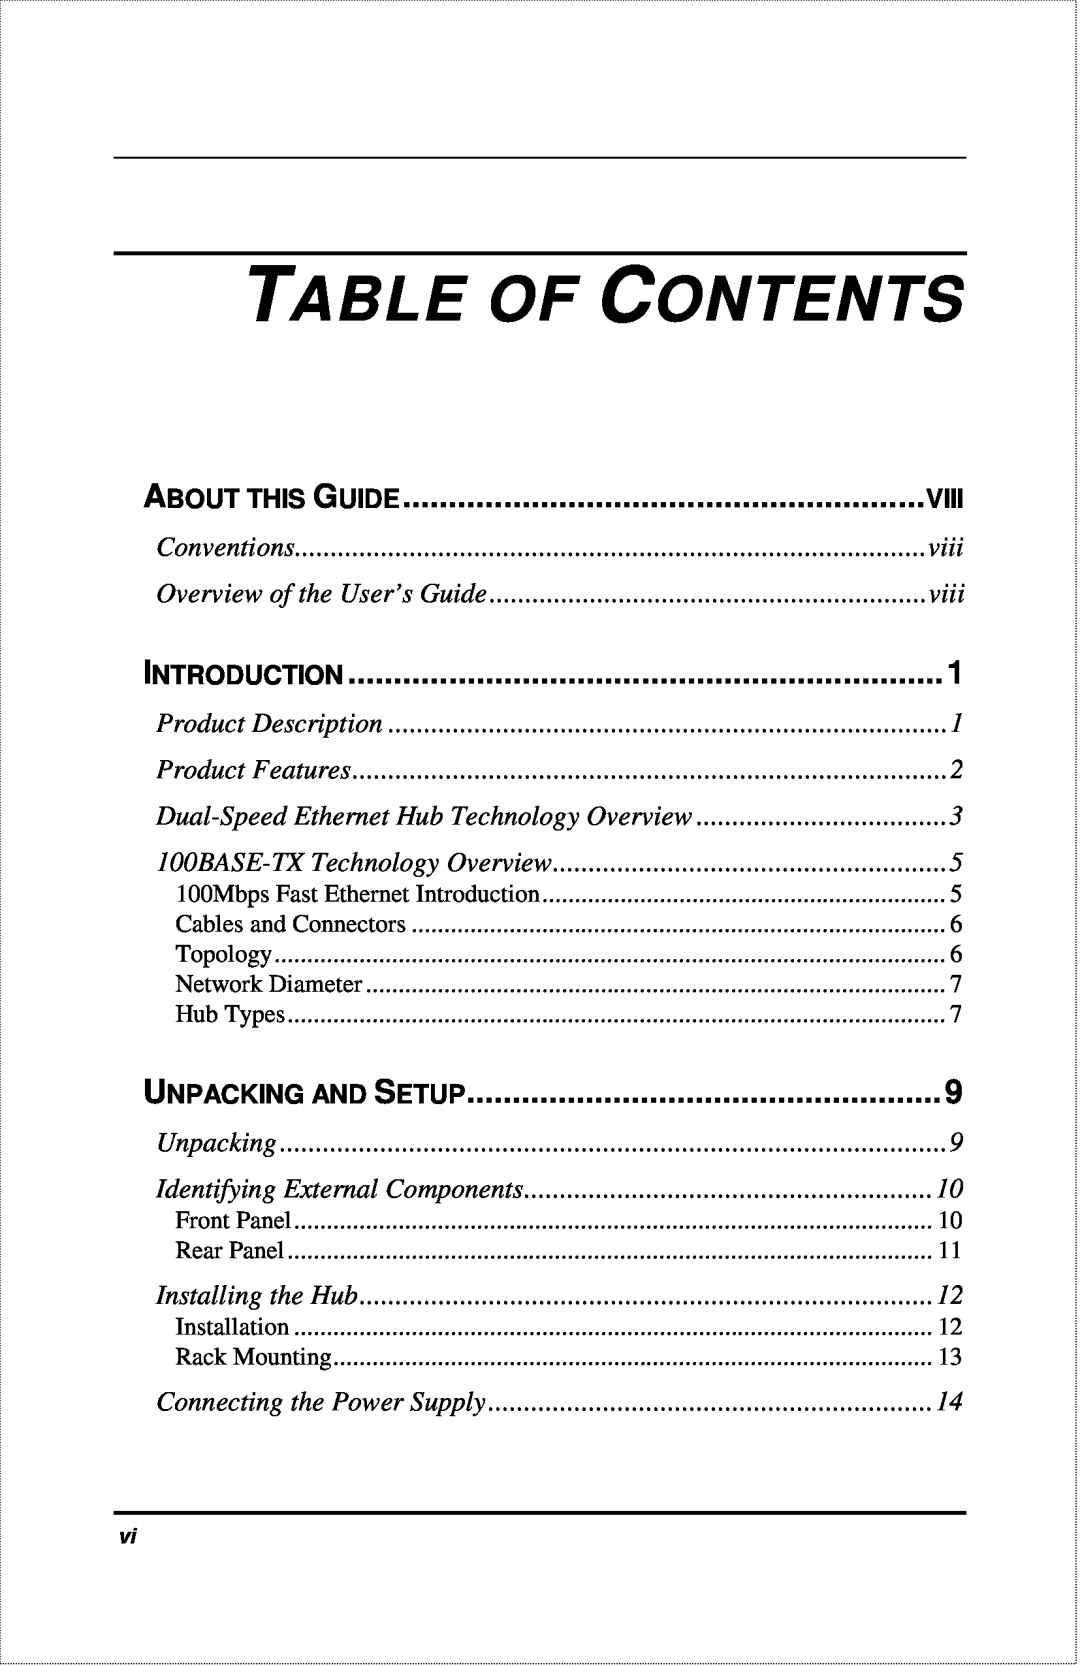 D-Link DFE-916X manual Table Of Contents, About This Guide, Introduction, Unpacking And Setup 